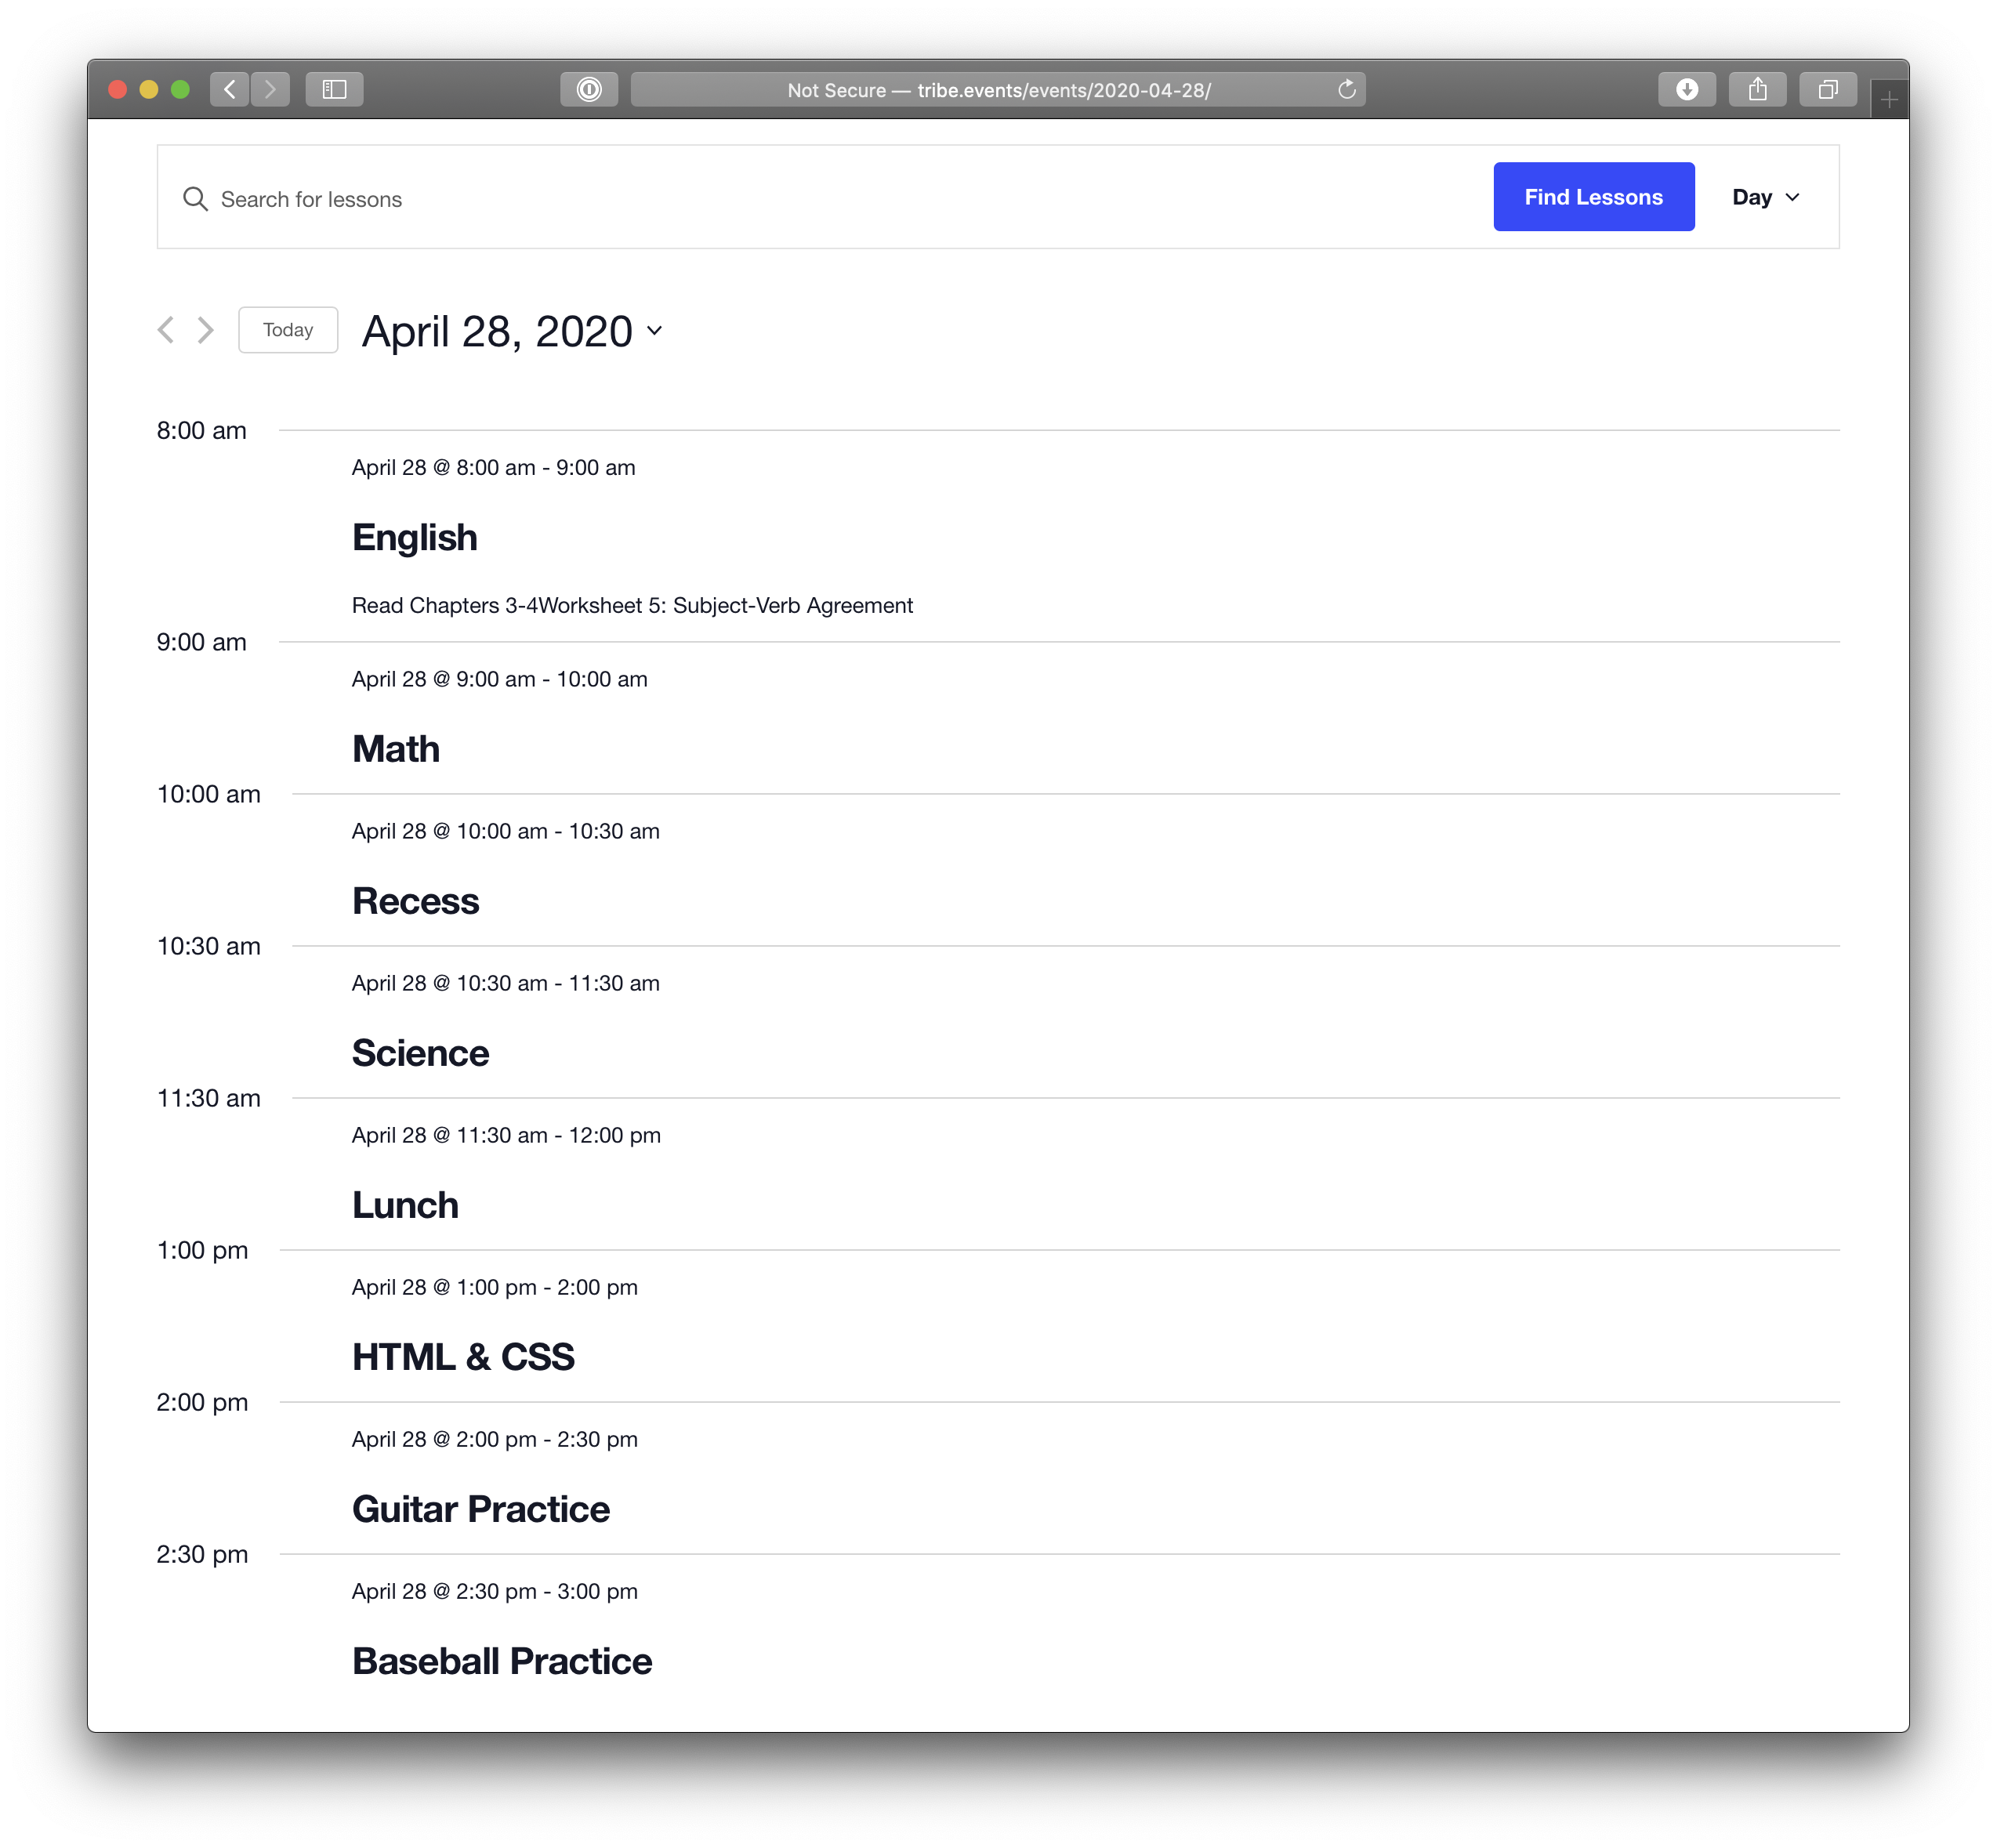 Screenshot of the calendar view for April 28 showing all upcoming lessons for that day.